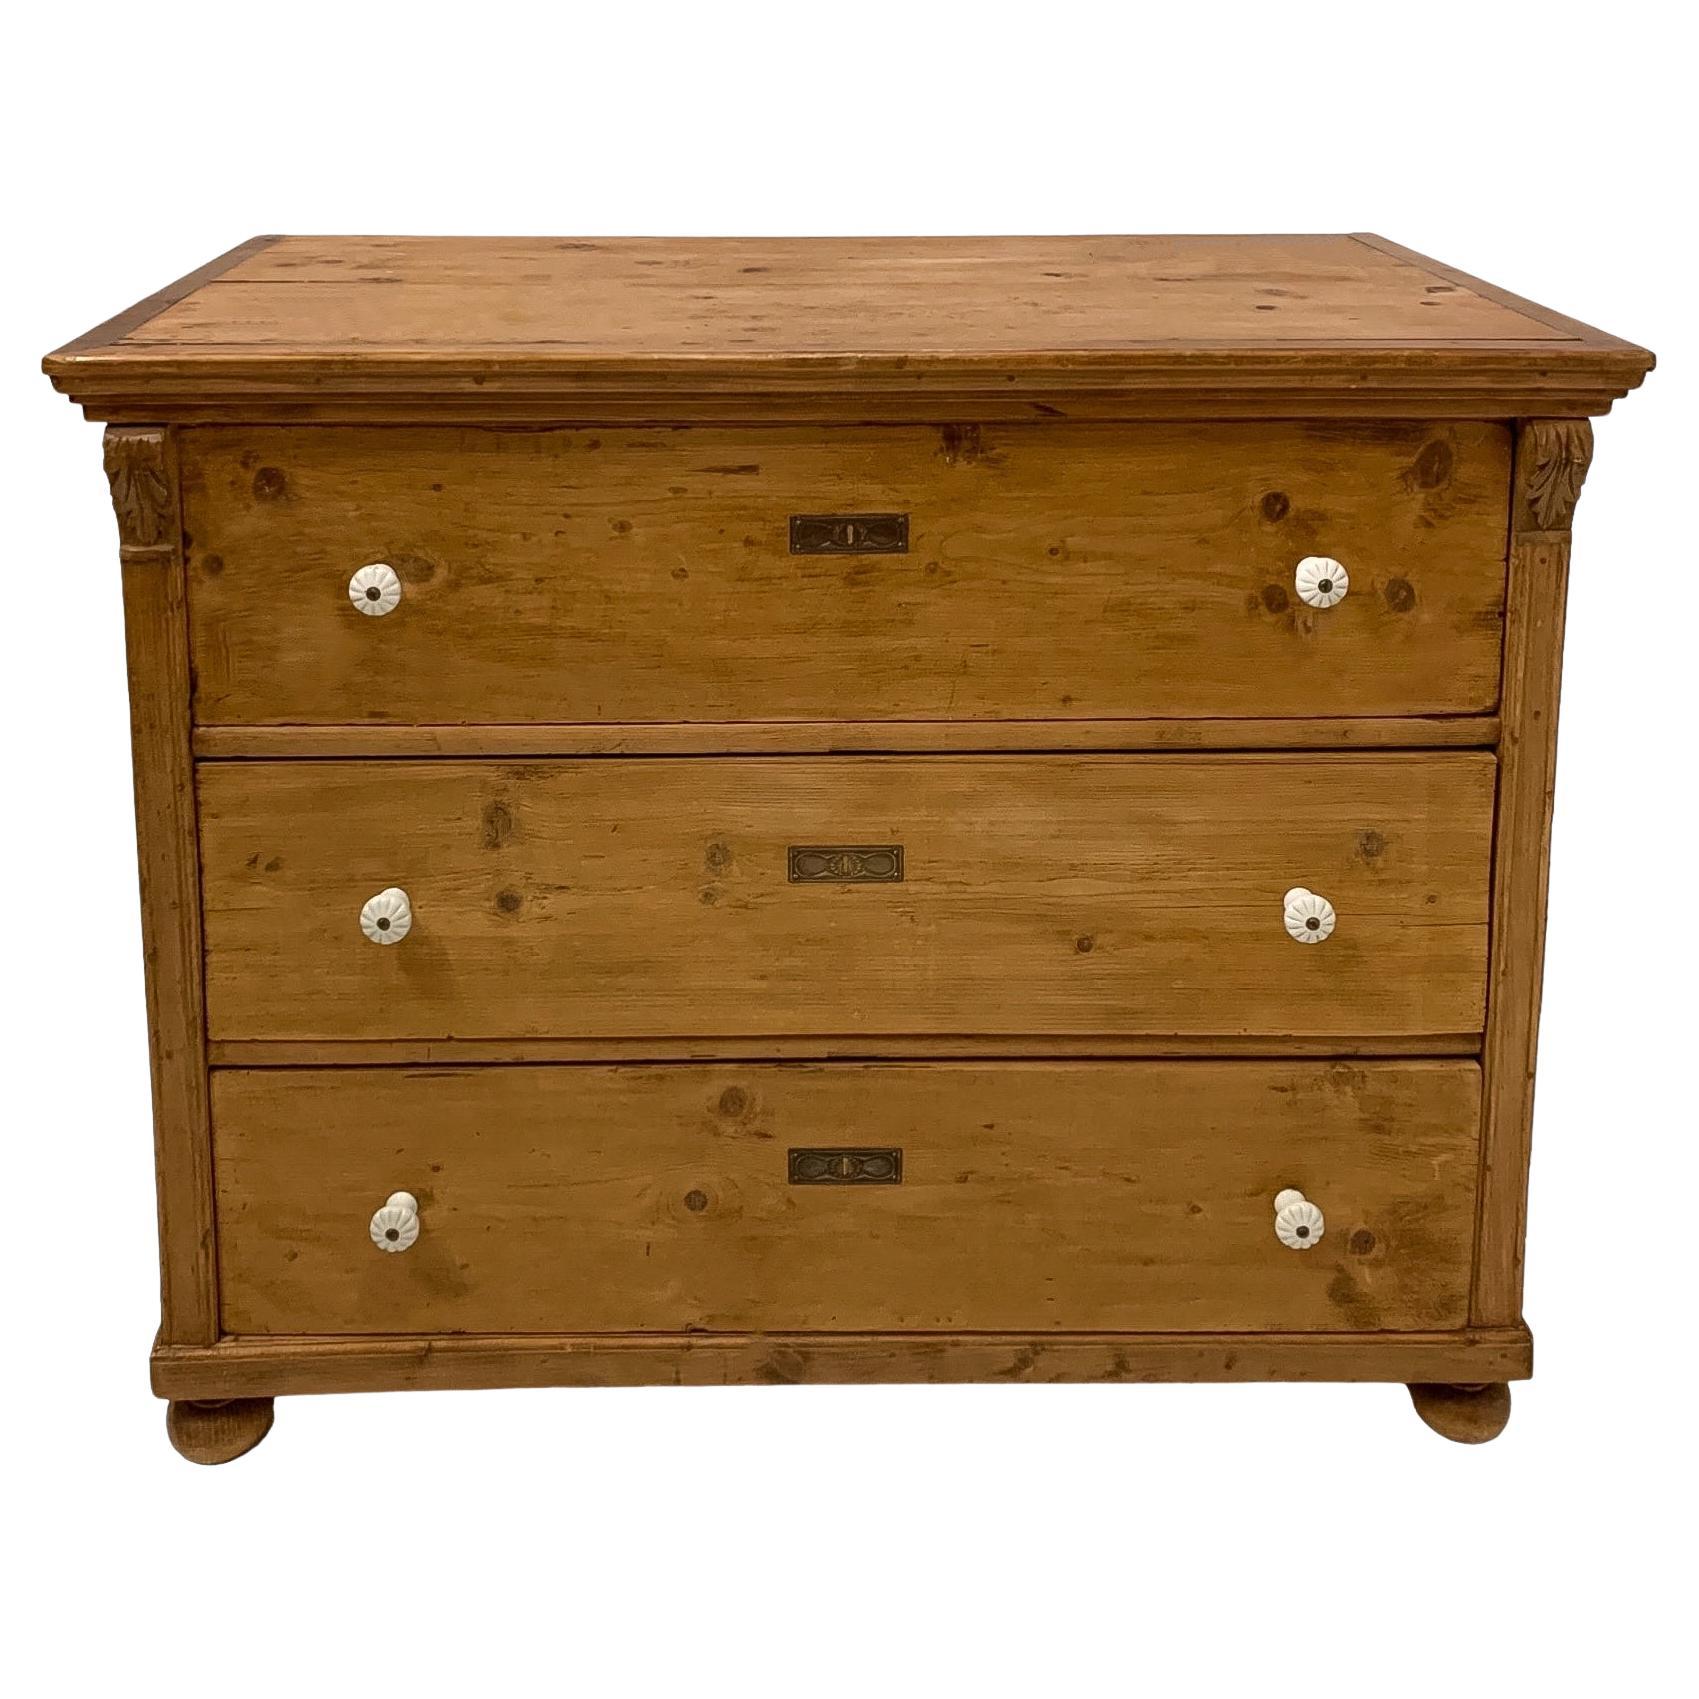 19th-C. Rustic English Country Pine Chest / Commode W / Porcelain Knobs For Sale